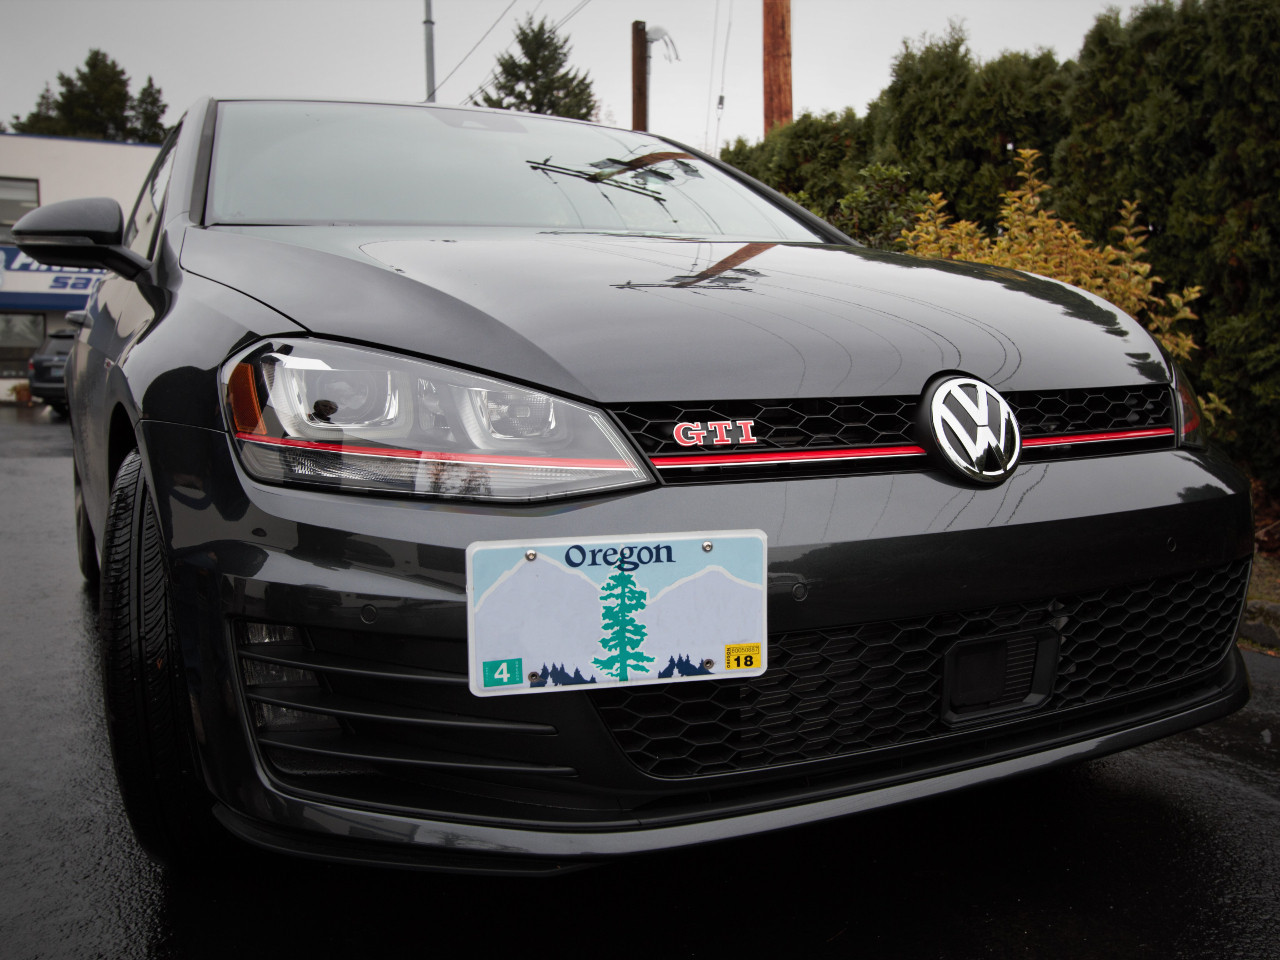 Cheap alternative to tow-hook license plate bracket : r/GolfGTI